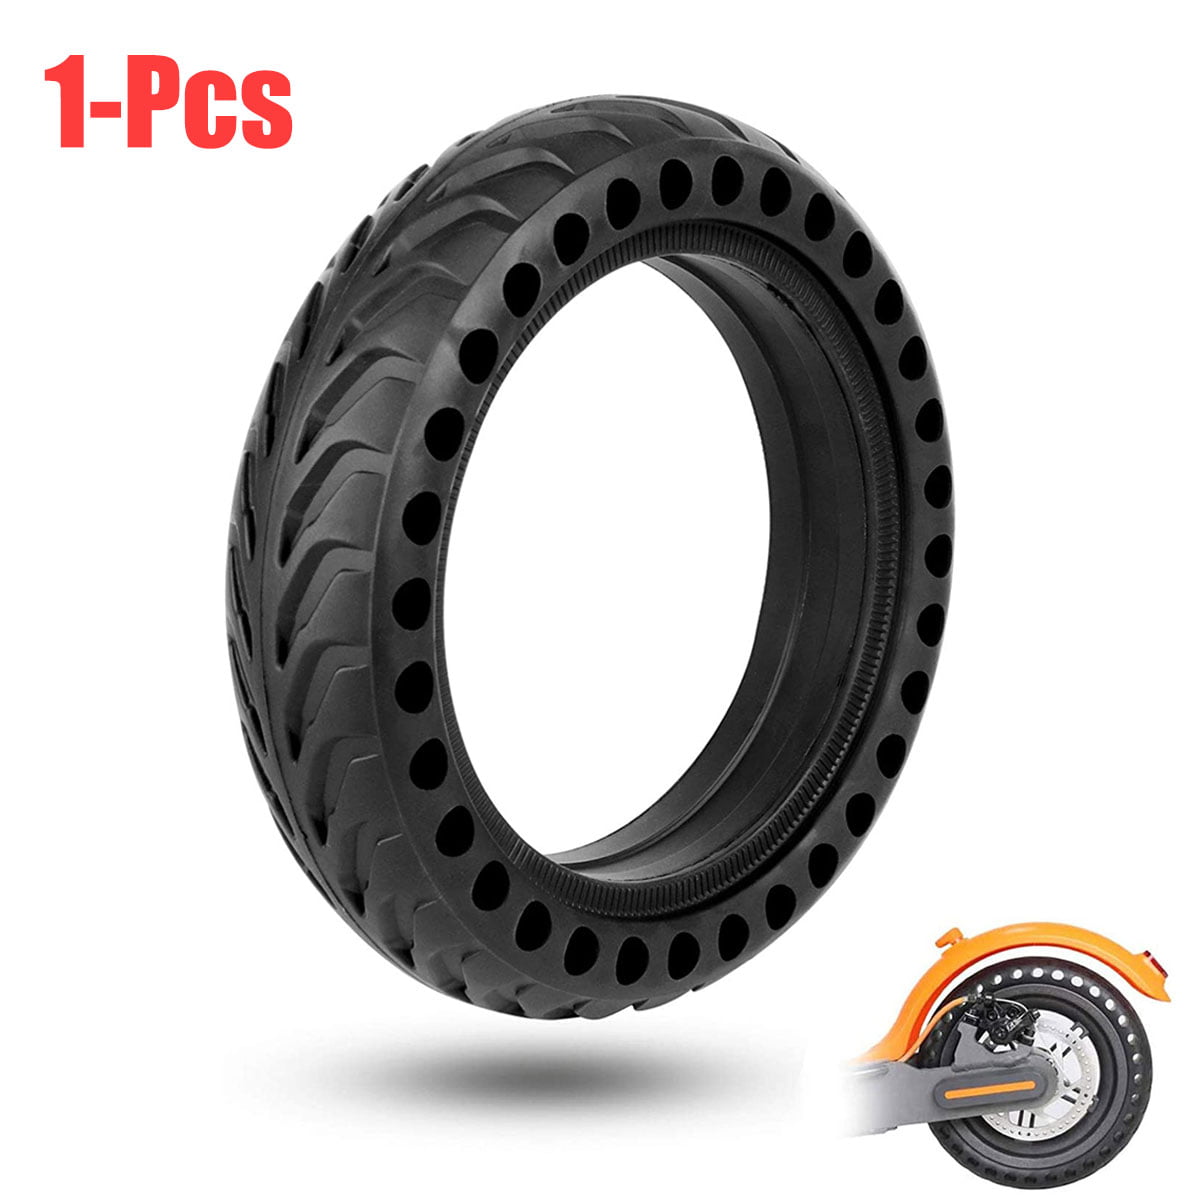 FOLOU Solid Tires 8.5 Inches Electric Scooter Wheels Replacement Tire 8-1/2 Front or Rear Honeycomb Tires for Xiaomi Mijia M365 1 Piece Gotrax GXL V2 and More 